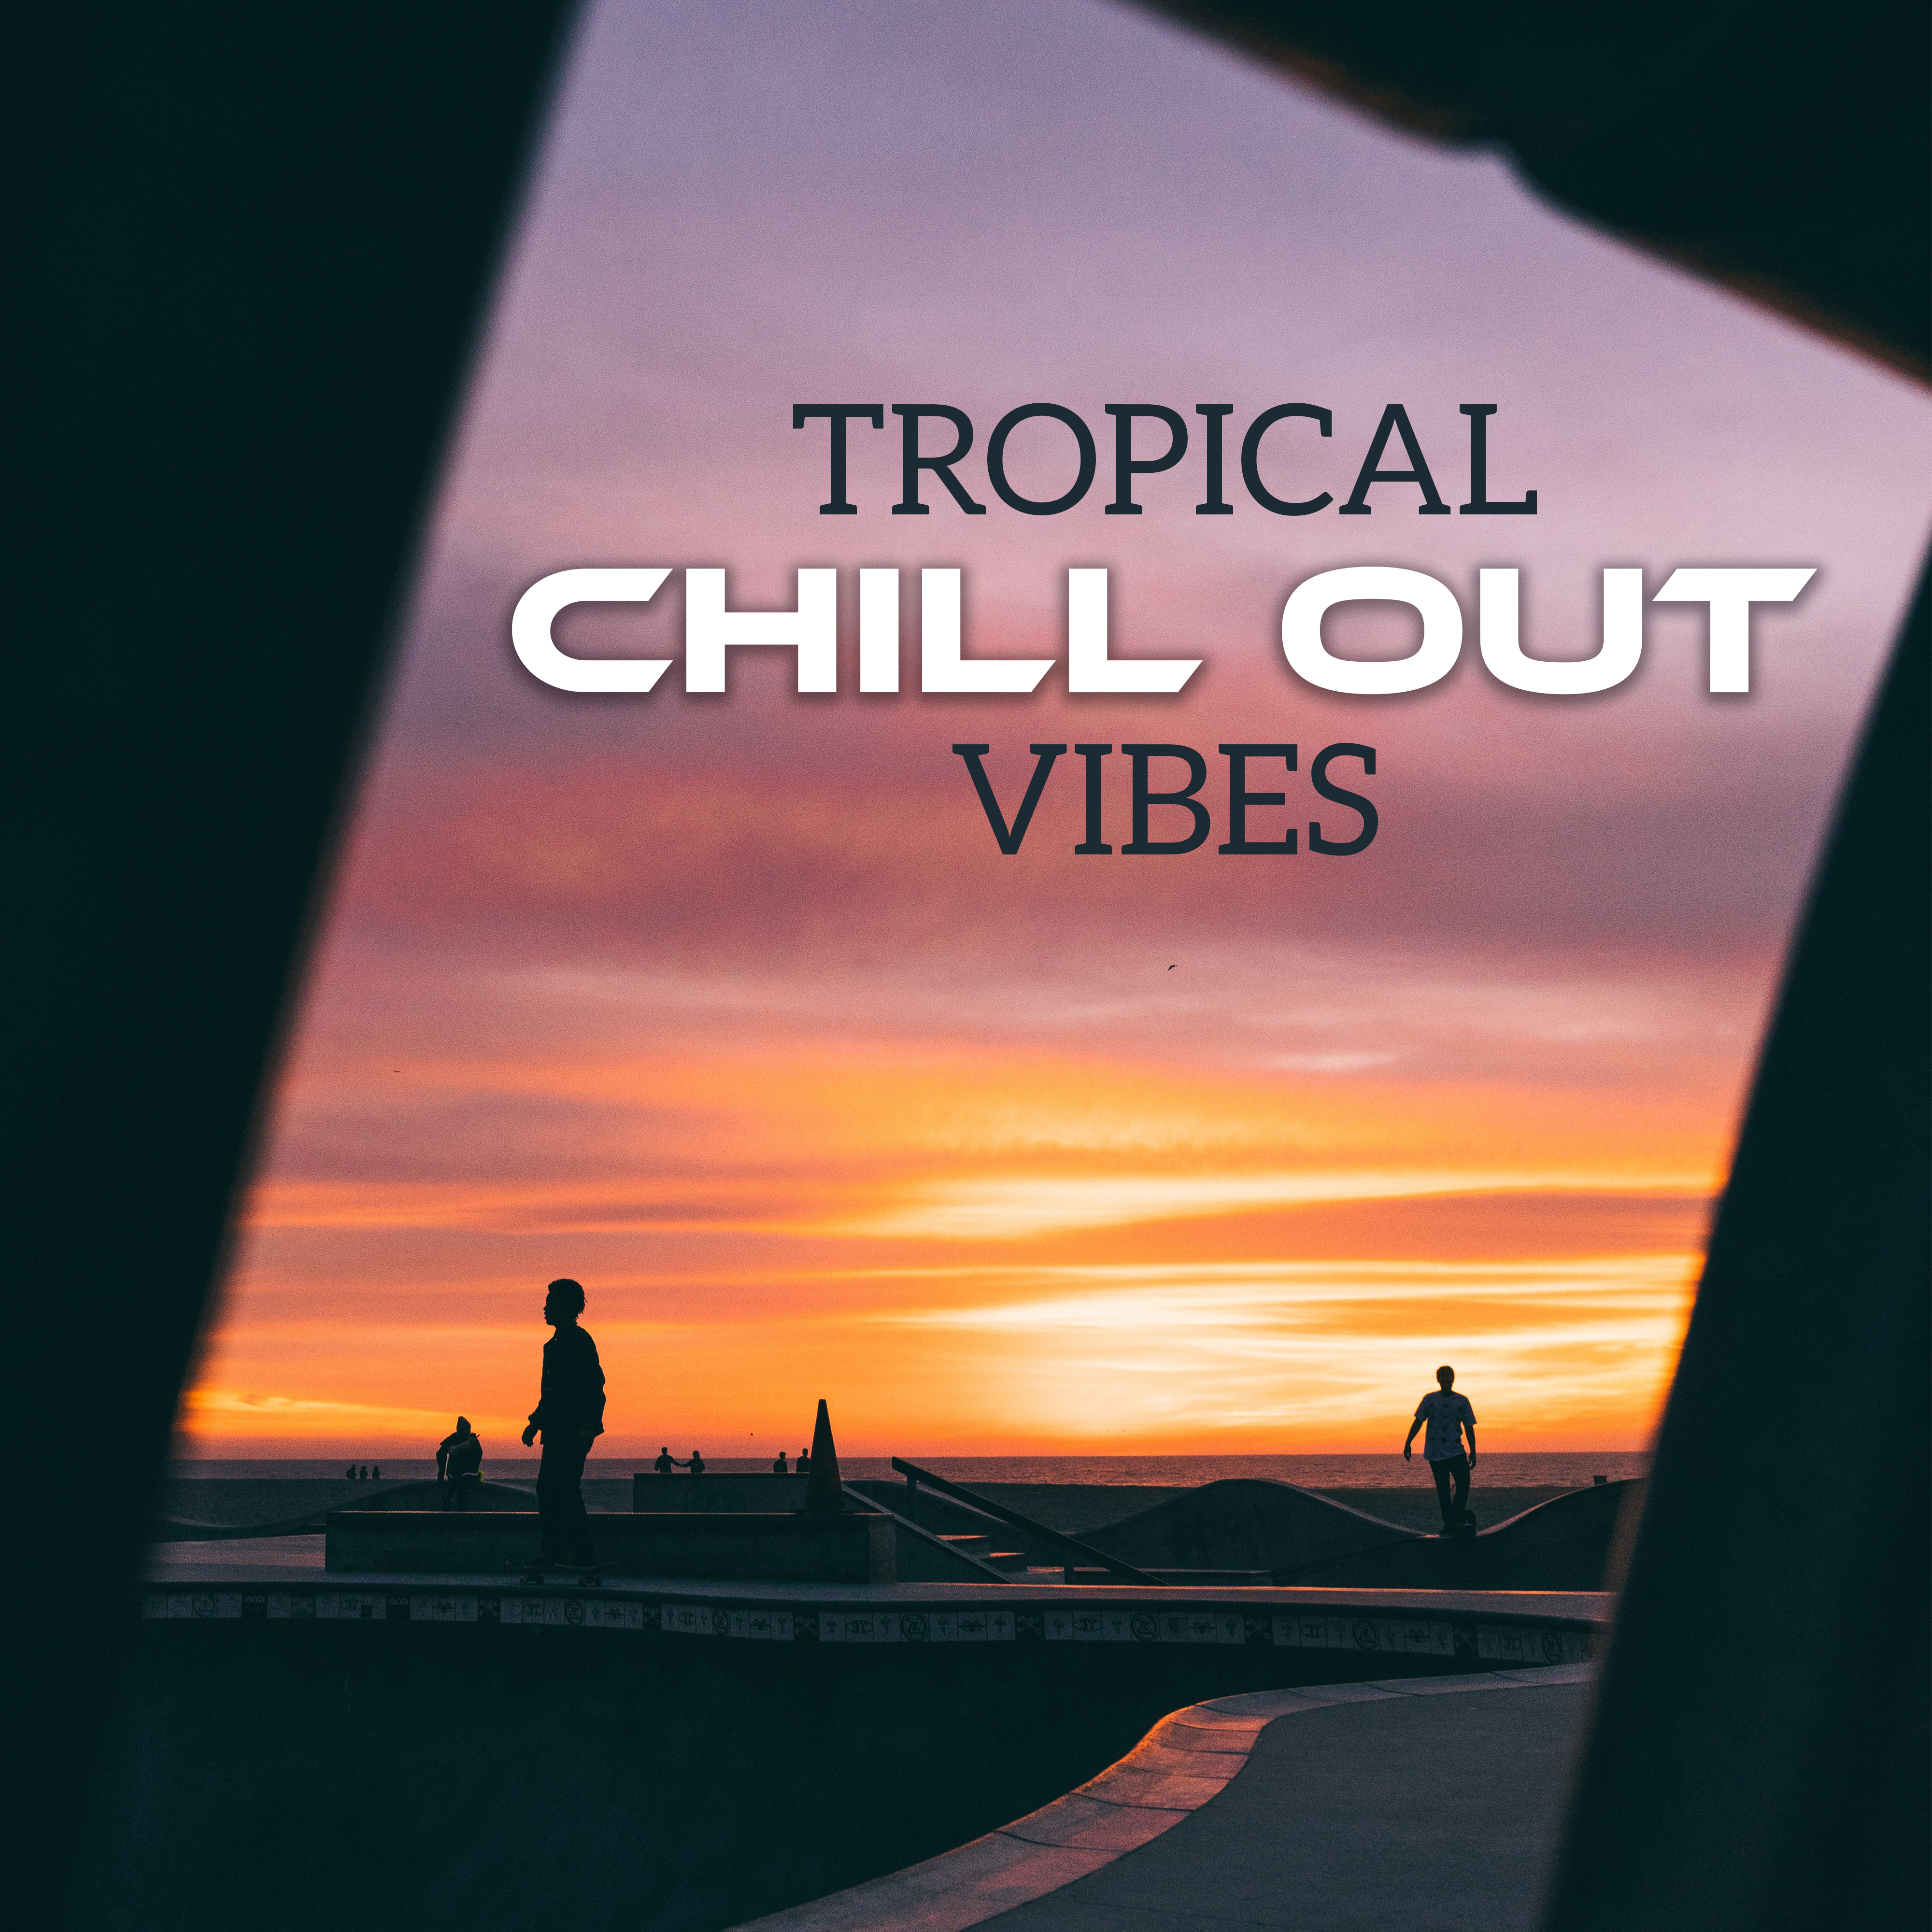 Tropical Chill Out Vibes